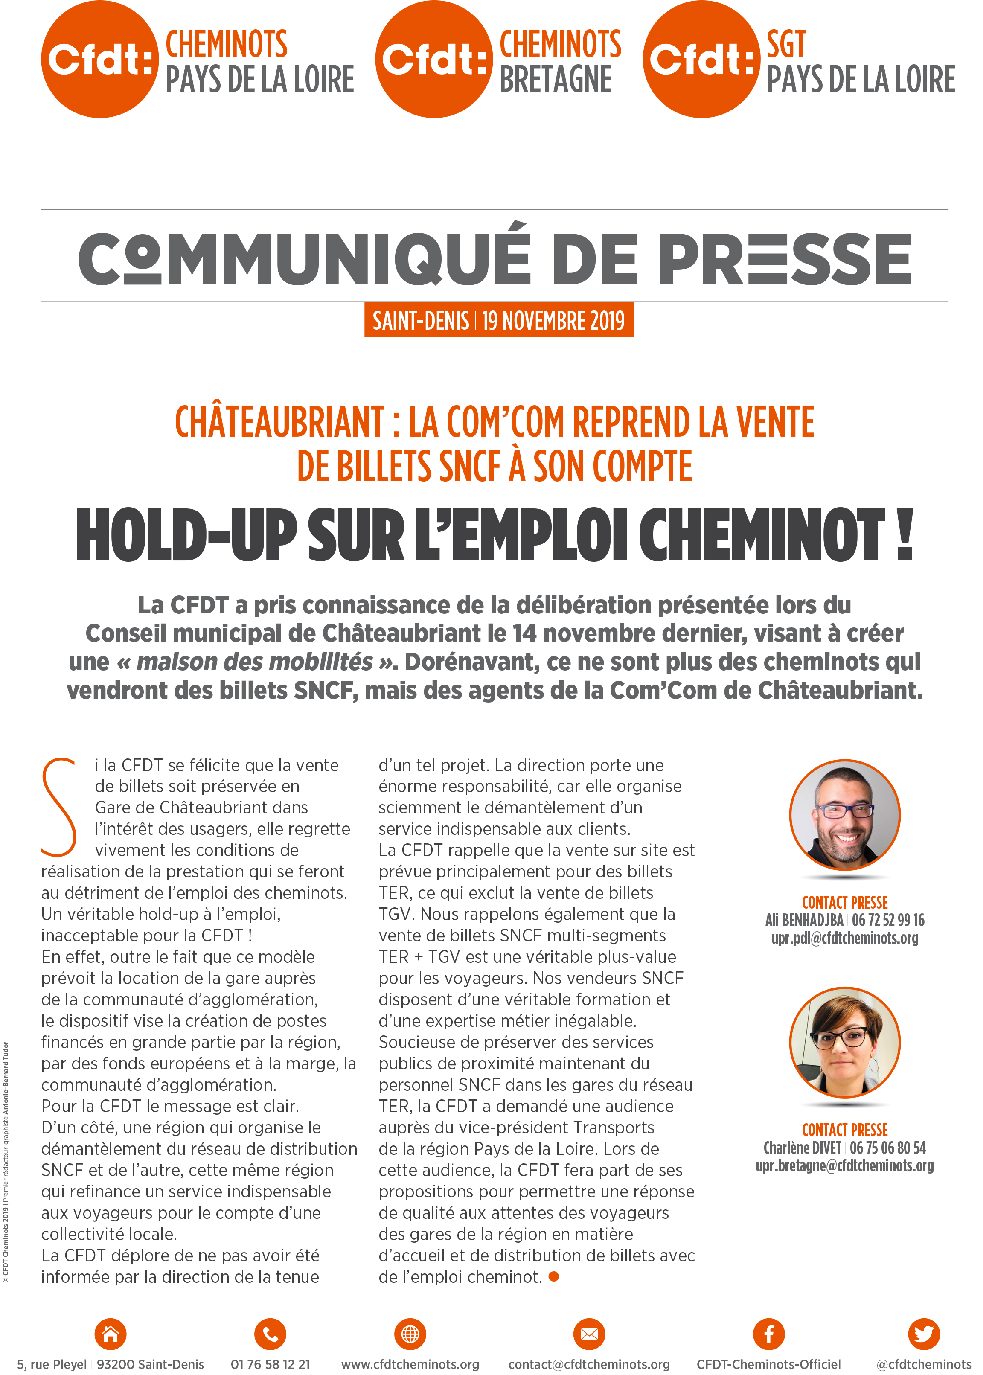 Hold-up sur l’emploi cheminot !